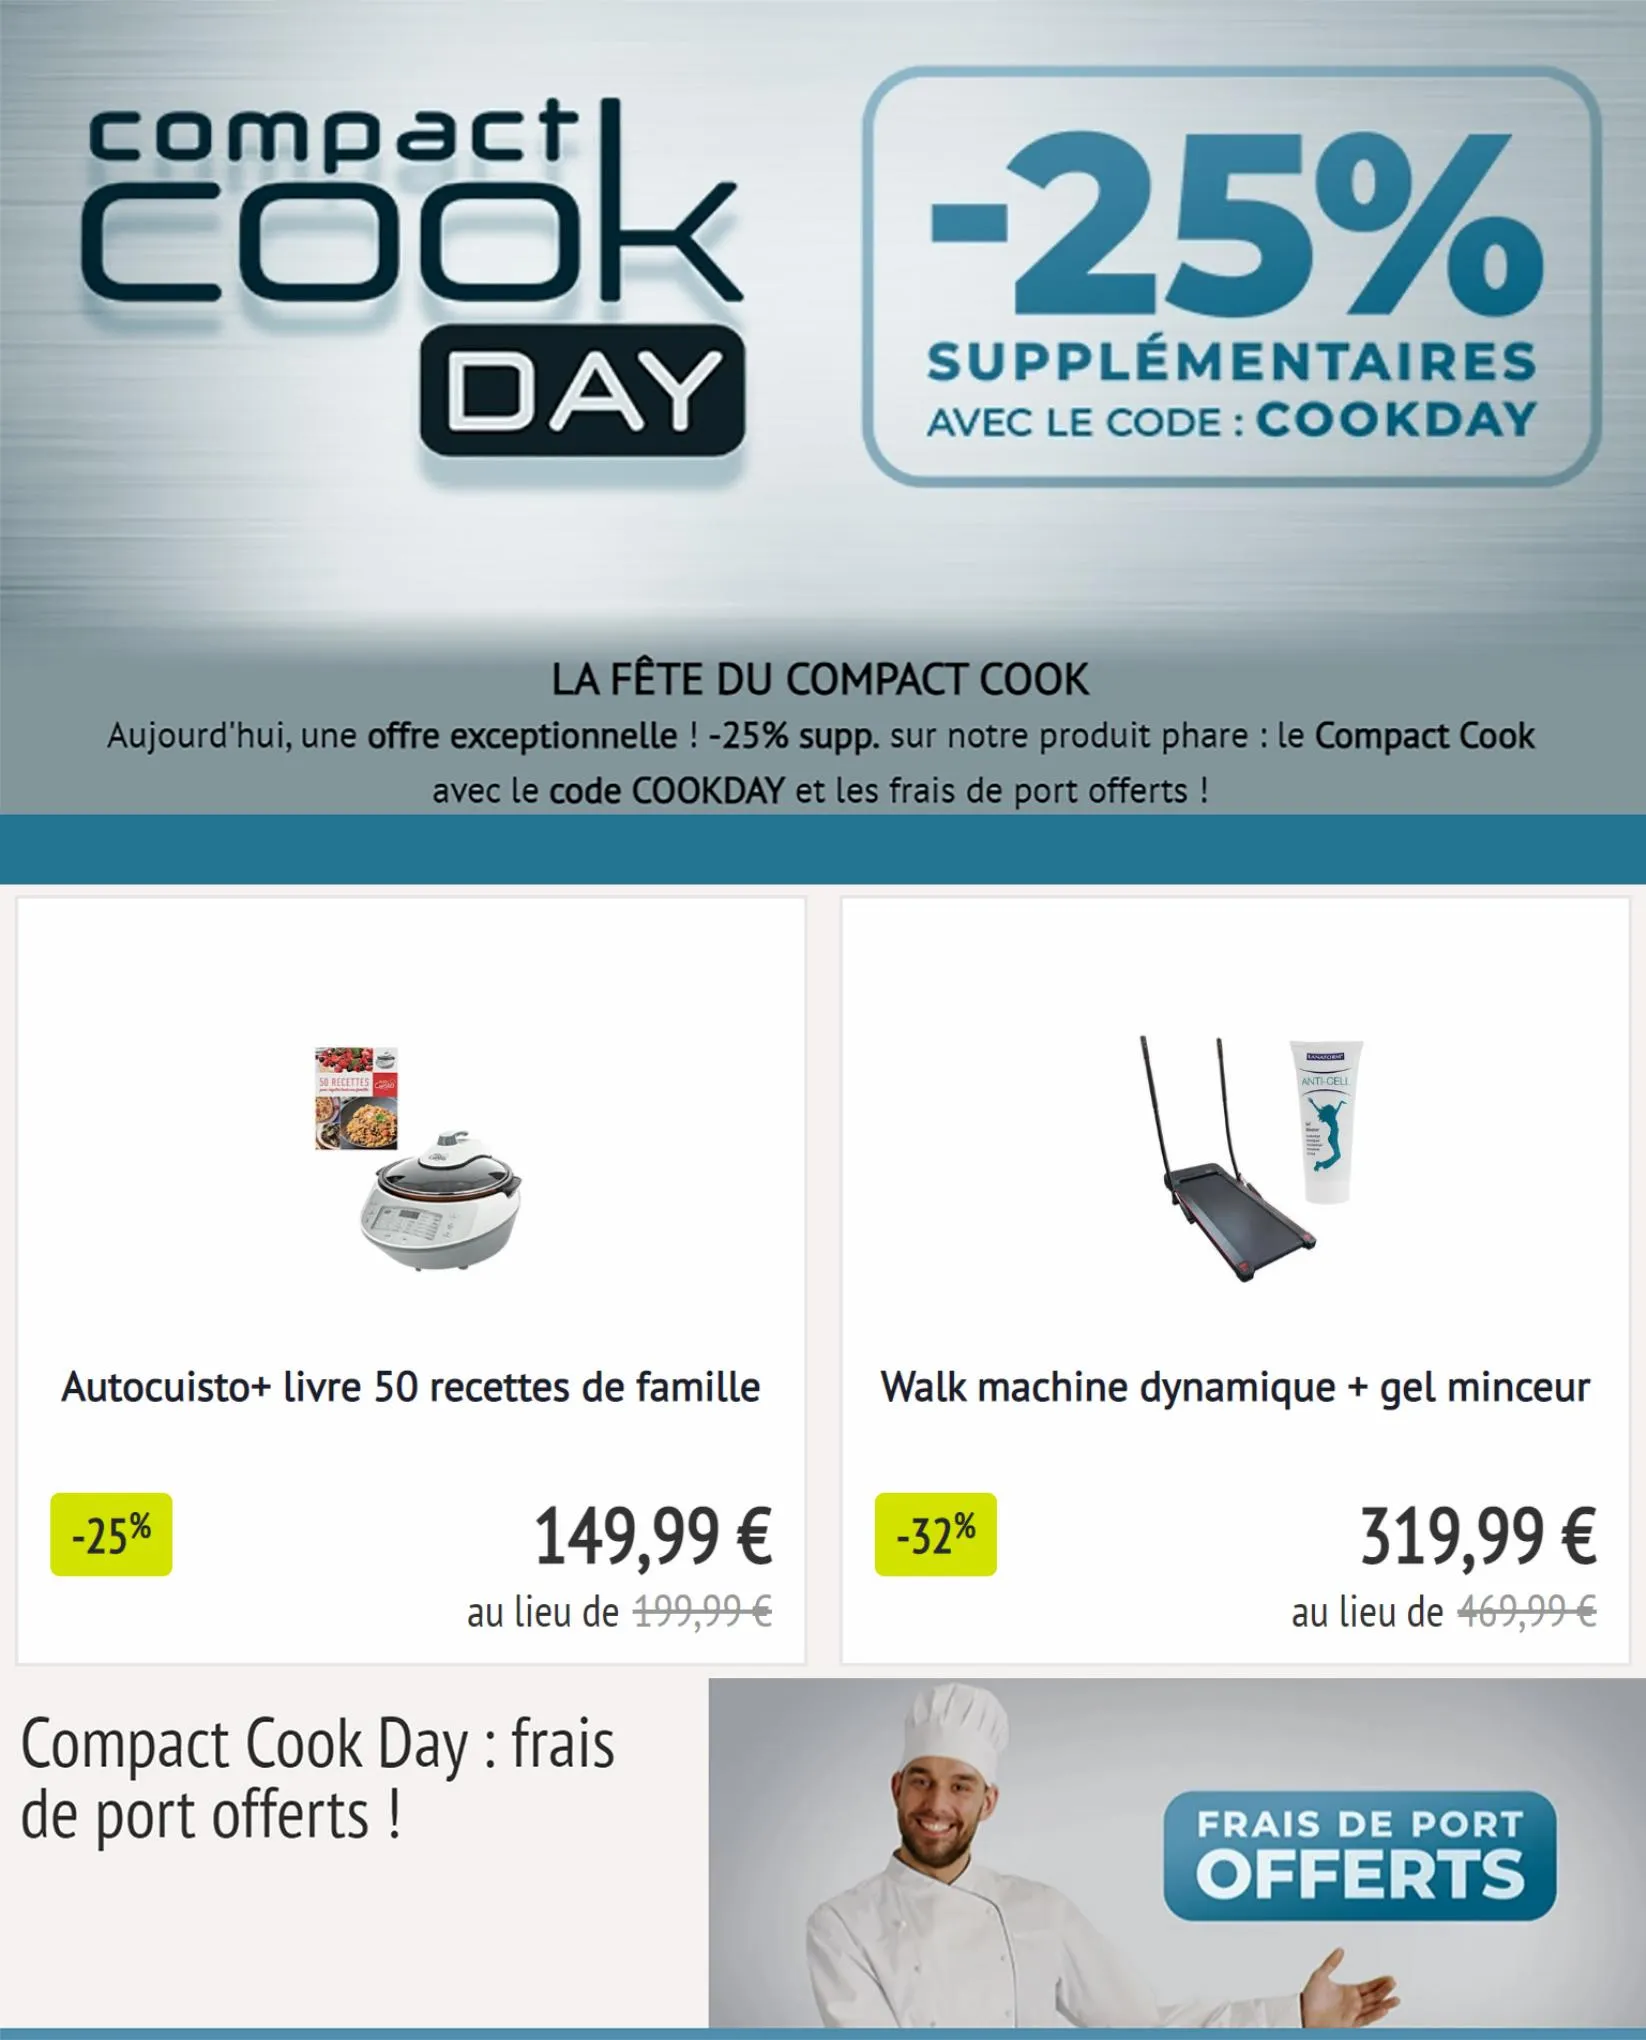 Catalogue COOKDAY -25% supplémentaires!, page 00005